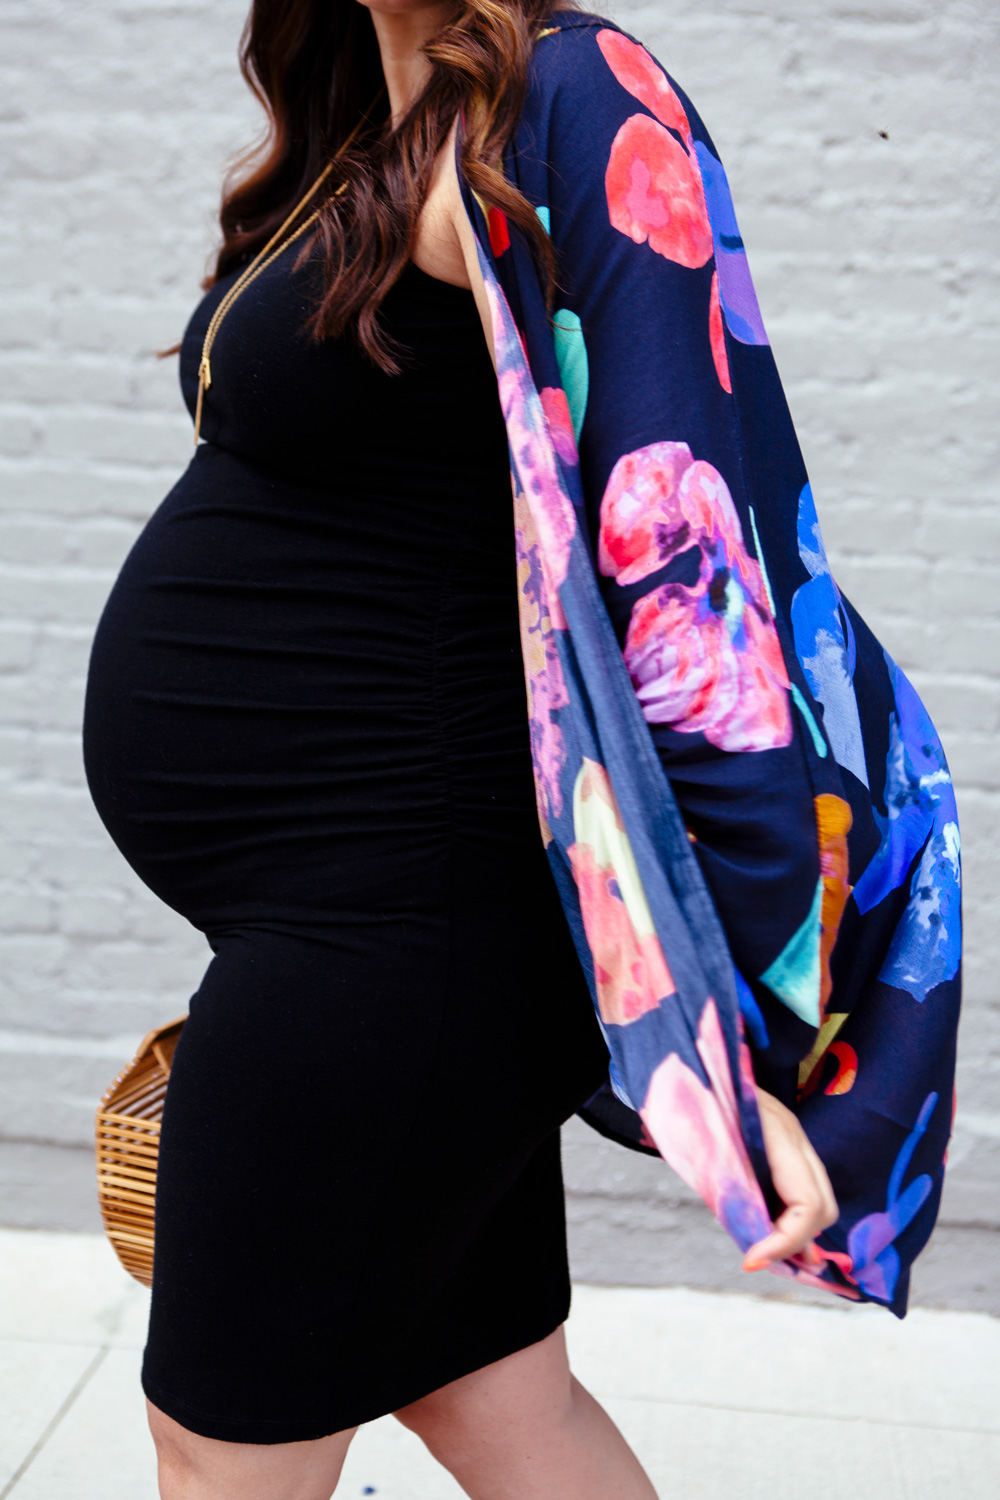 Maternity Kimono Outfit - By Lauren M